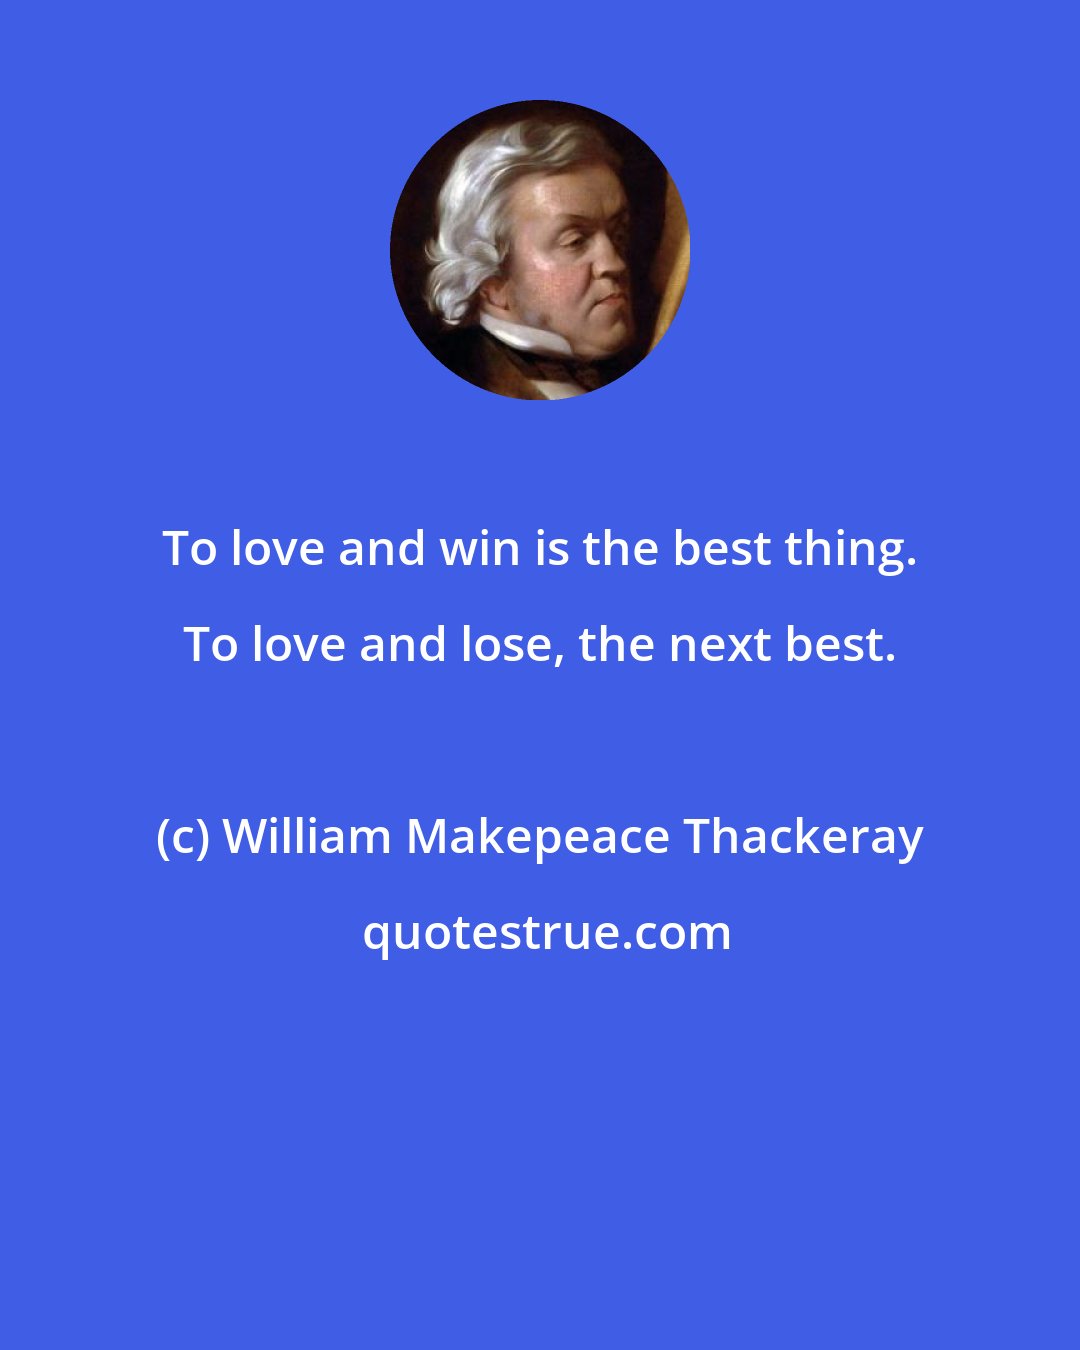 William Makepeace Thackeray: To love and win is the best thing. To love and lose, the next best.